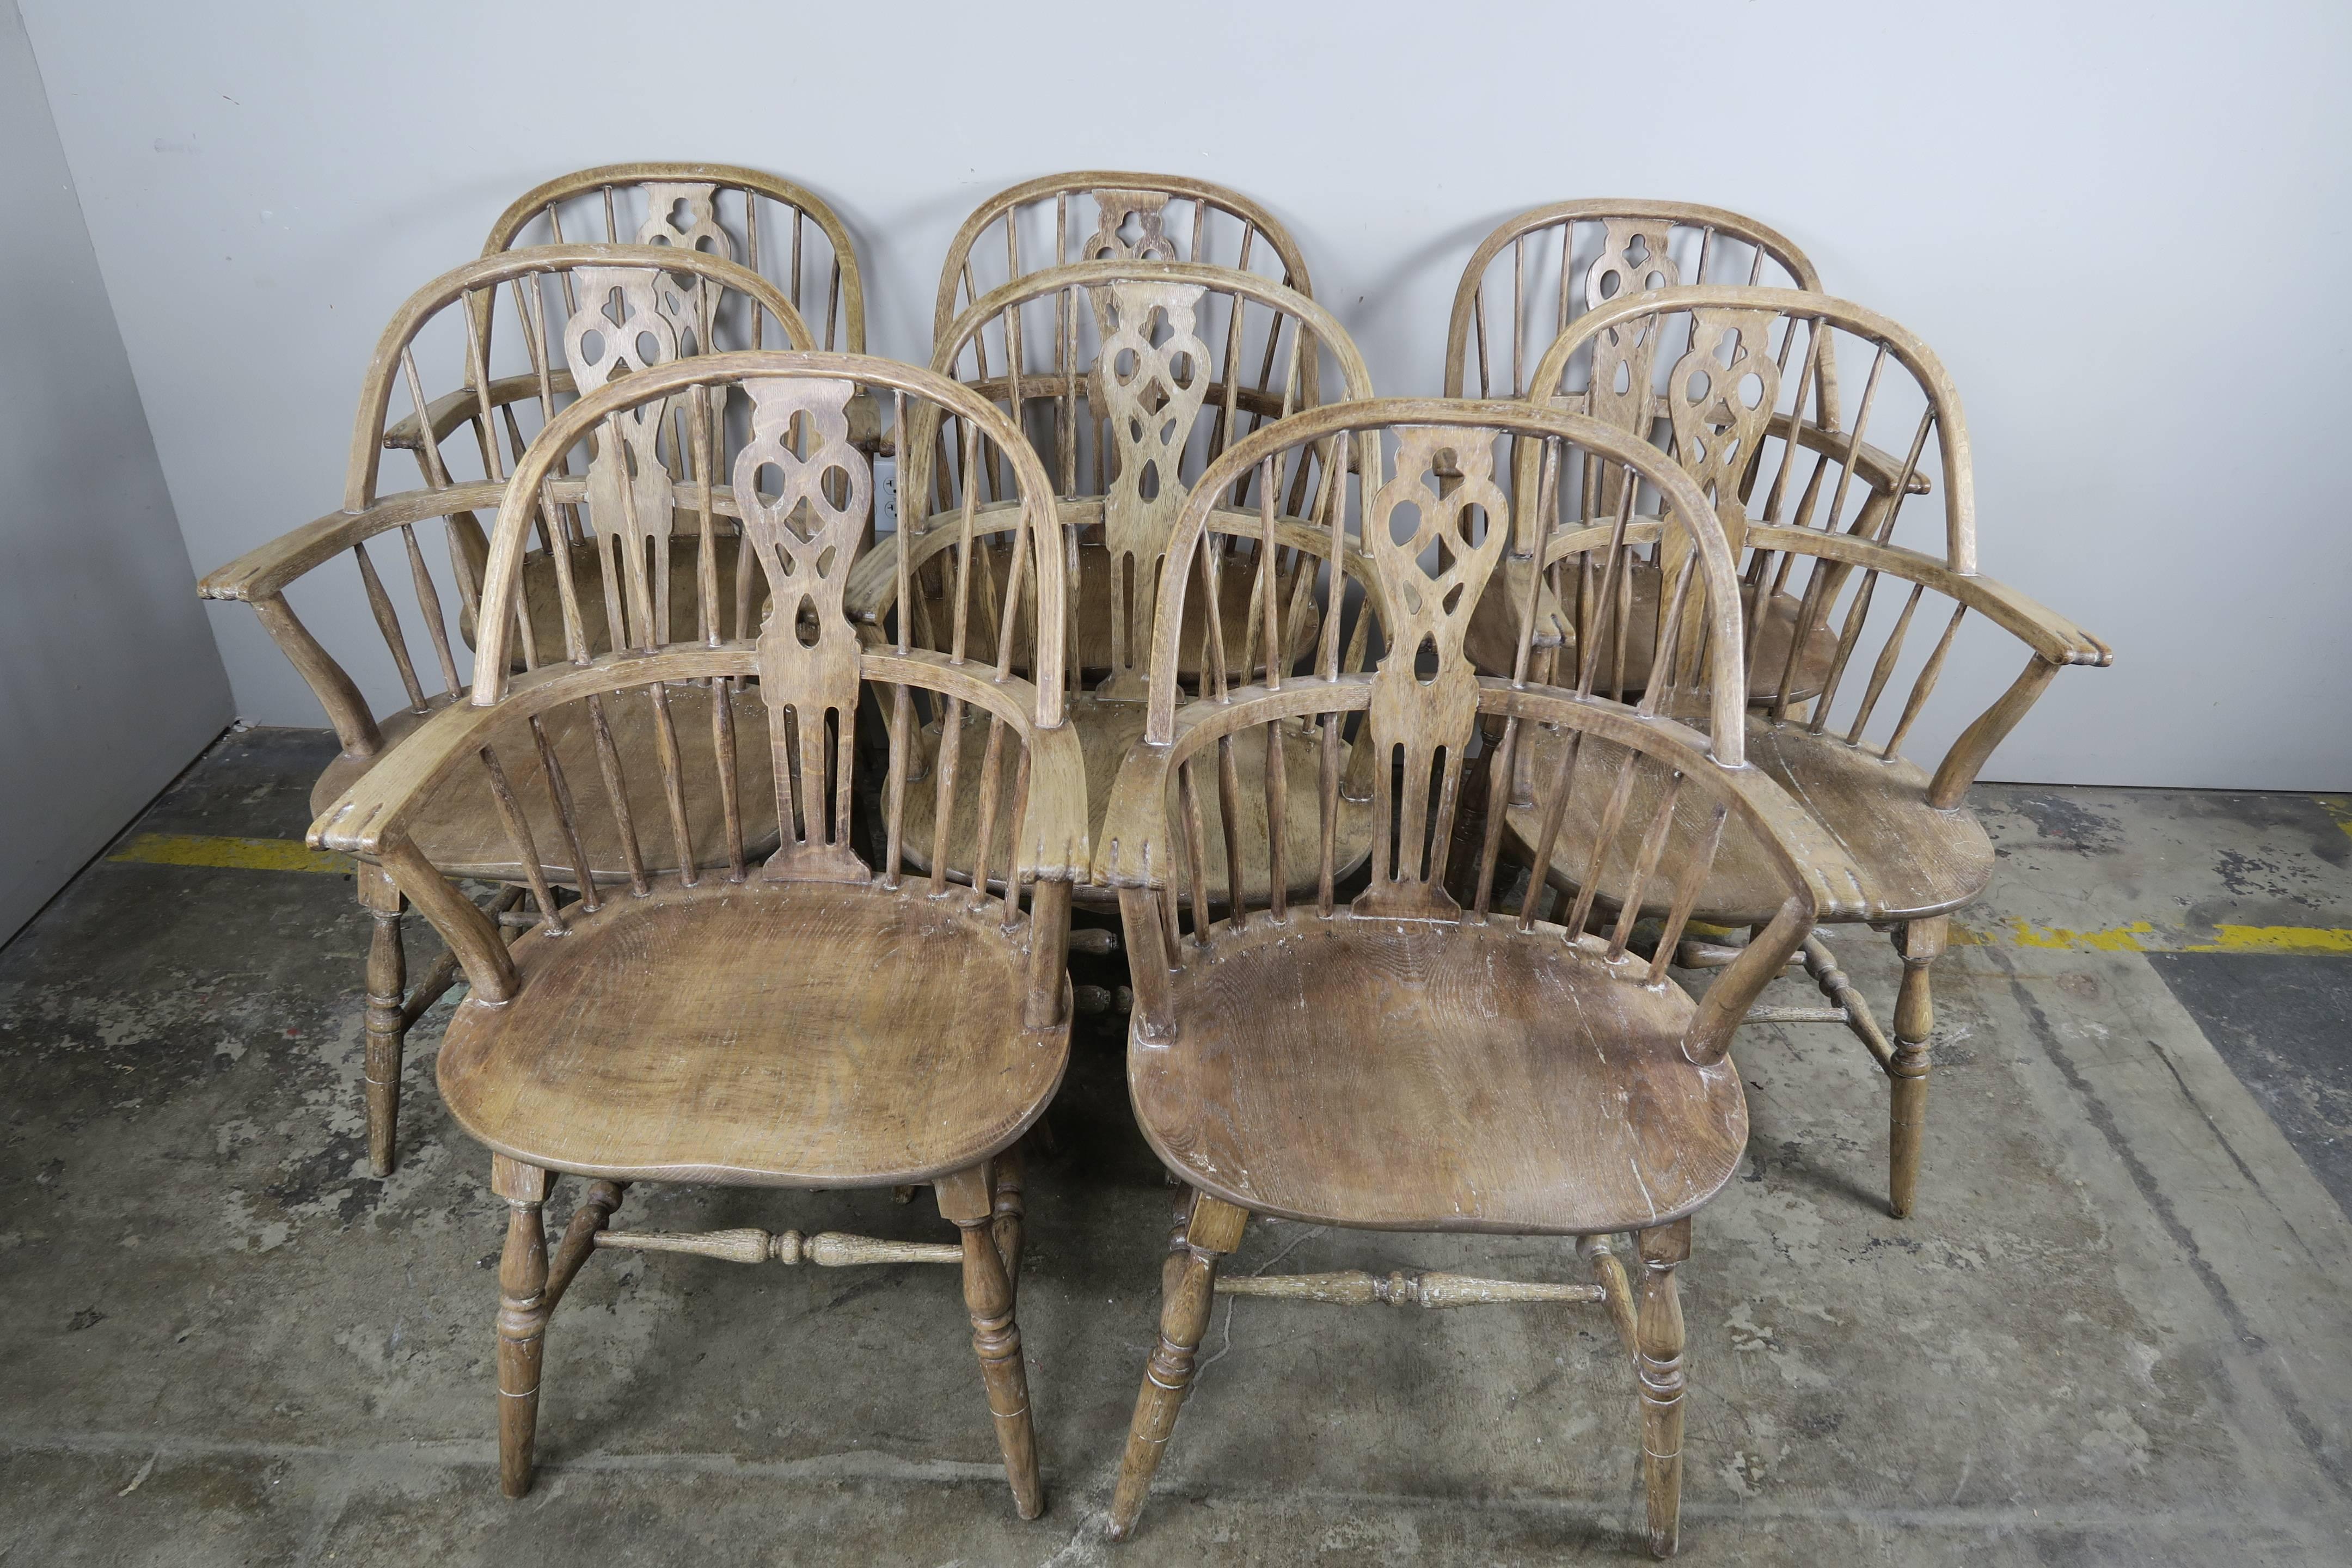 Set of handcrafted eight elmwood windsor style armchairs in a slightly white washed finish with spindle and pierced splat backs, scrolled arms, saddle seats, and turned legs with connecting stretchers.